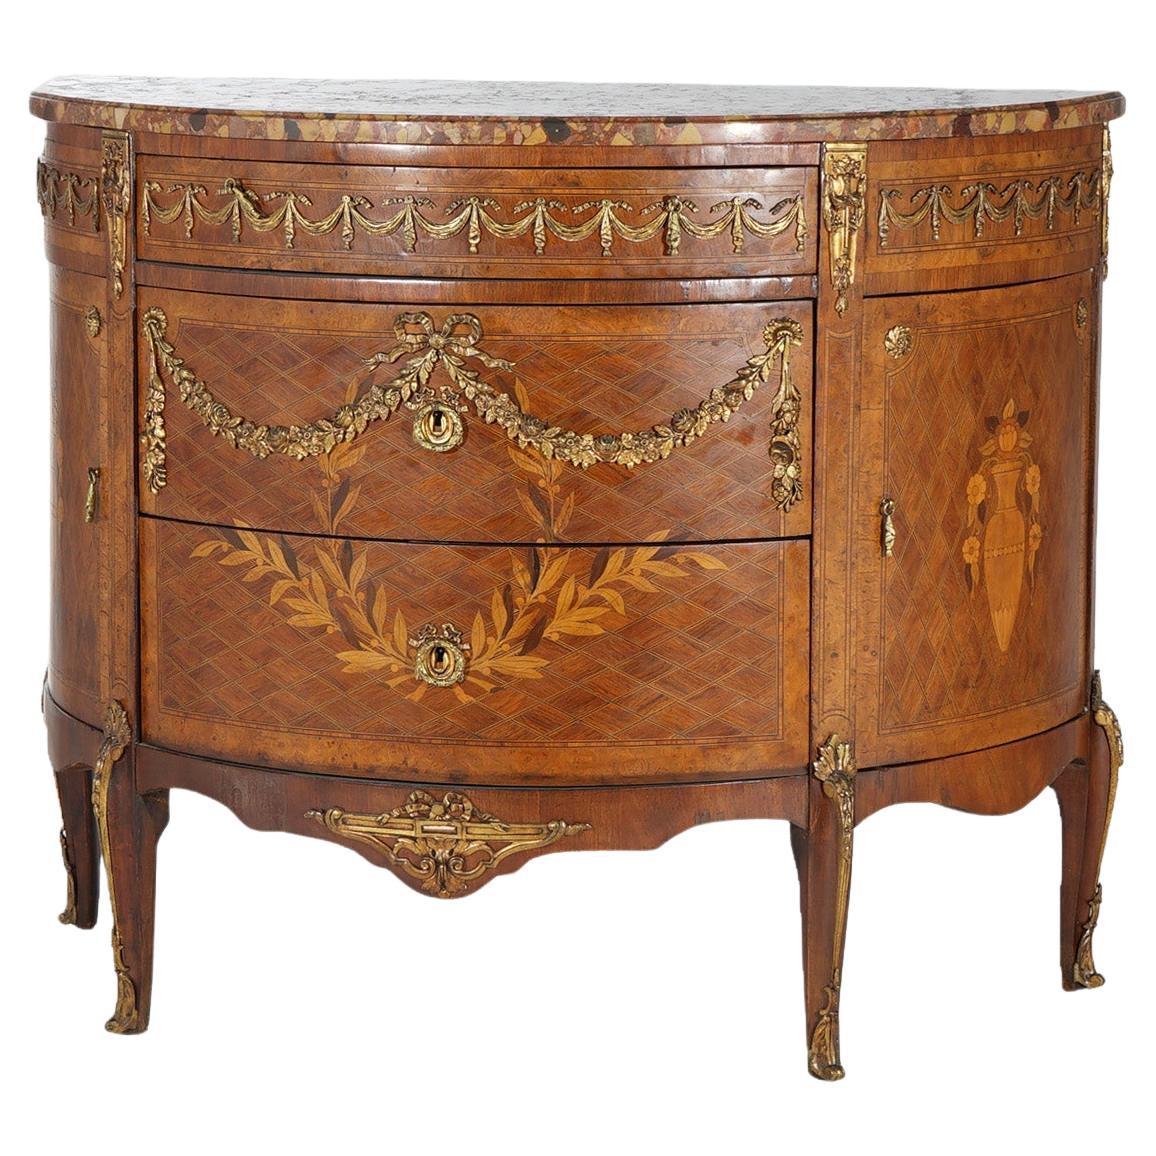 Antique French Louis XVI Kingwood Marquetry & Marble Console by Blanchet c1870 For Sale